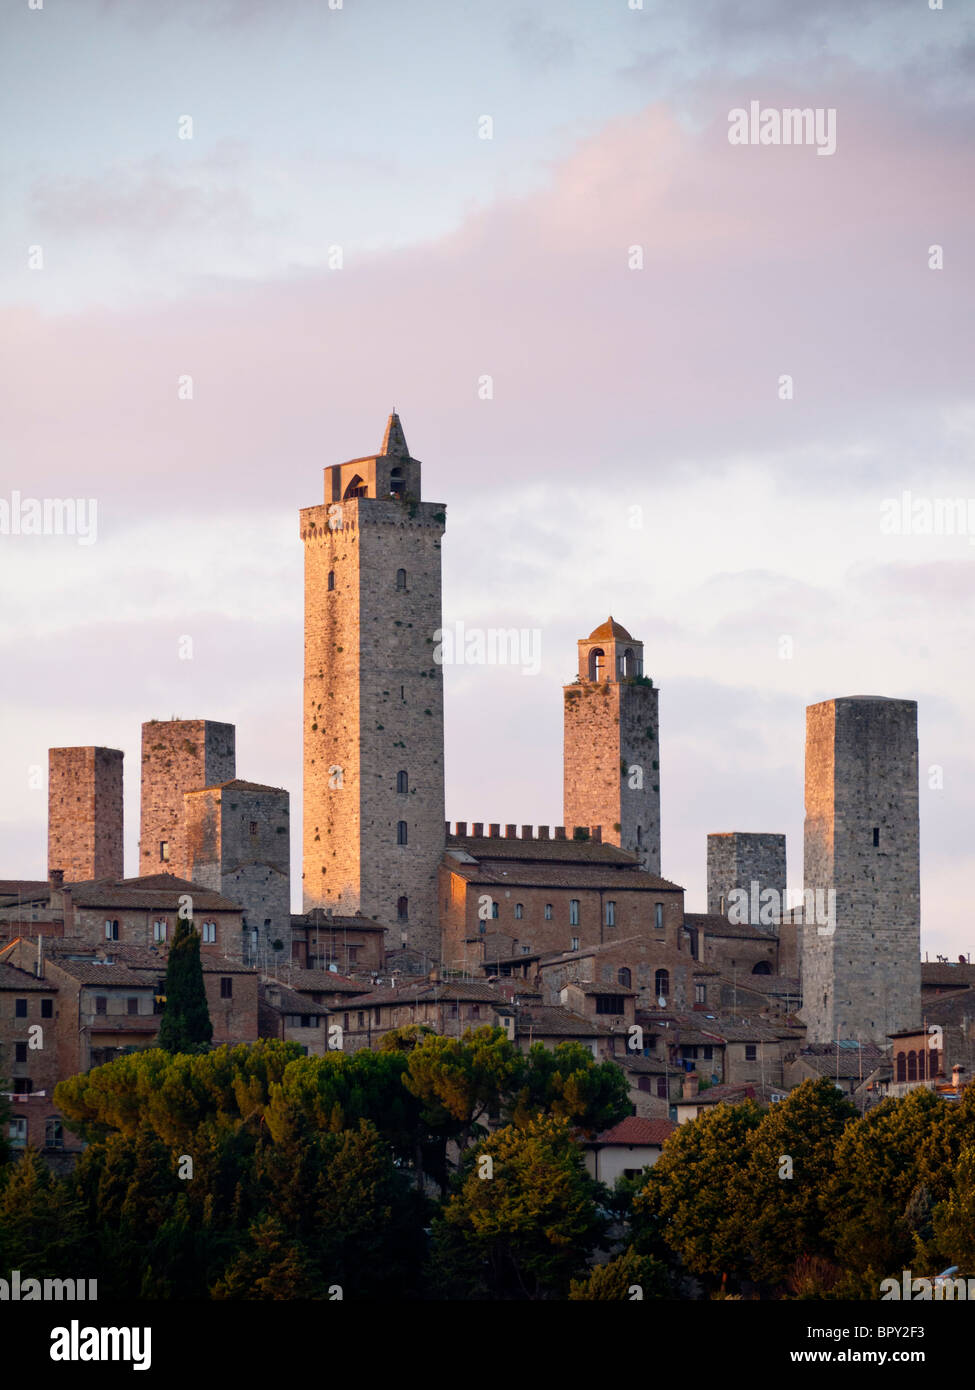 San Gimignano in Tuscany, Italy, mediaval Tuscan town, called medieval Manhattan or the Italian city of towers Stock Photo